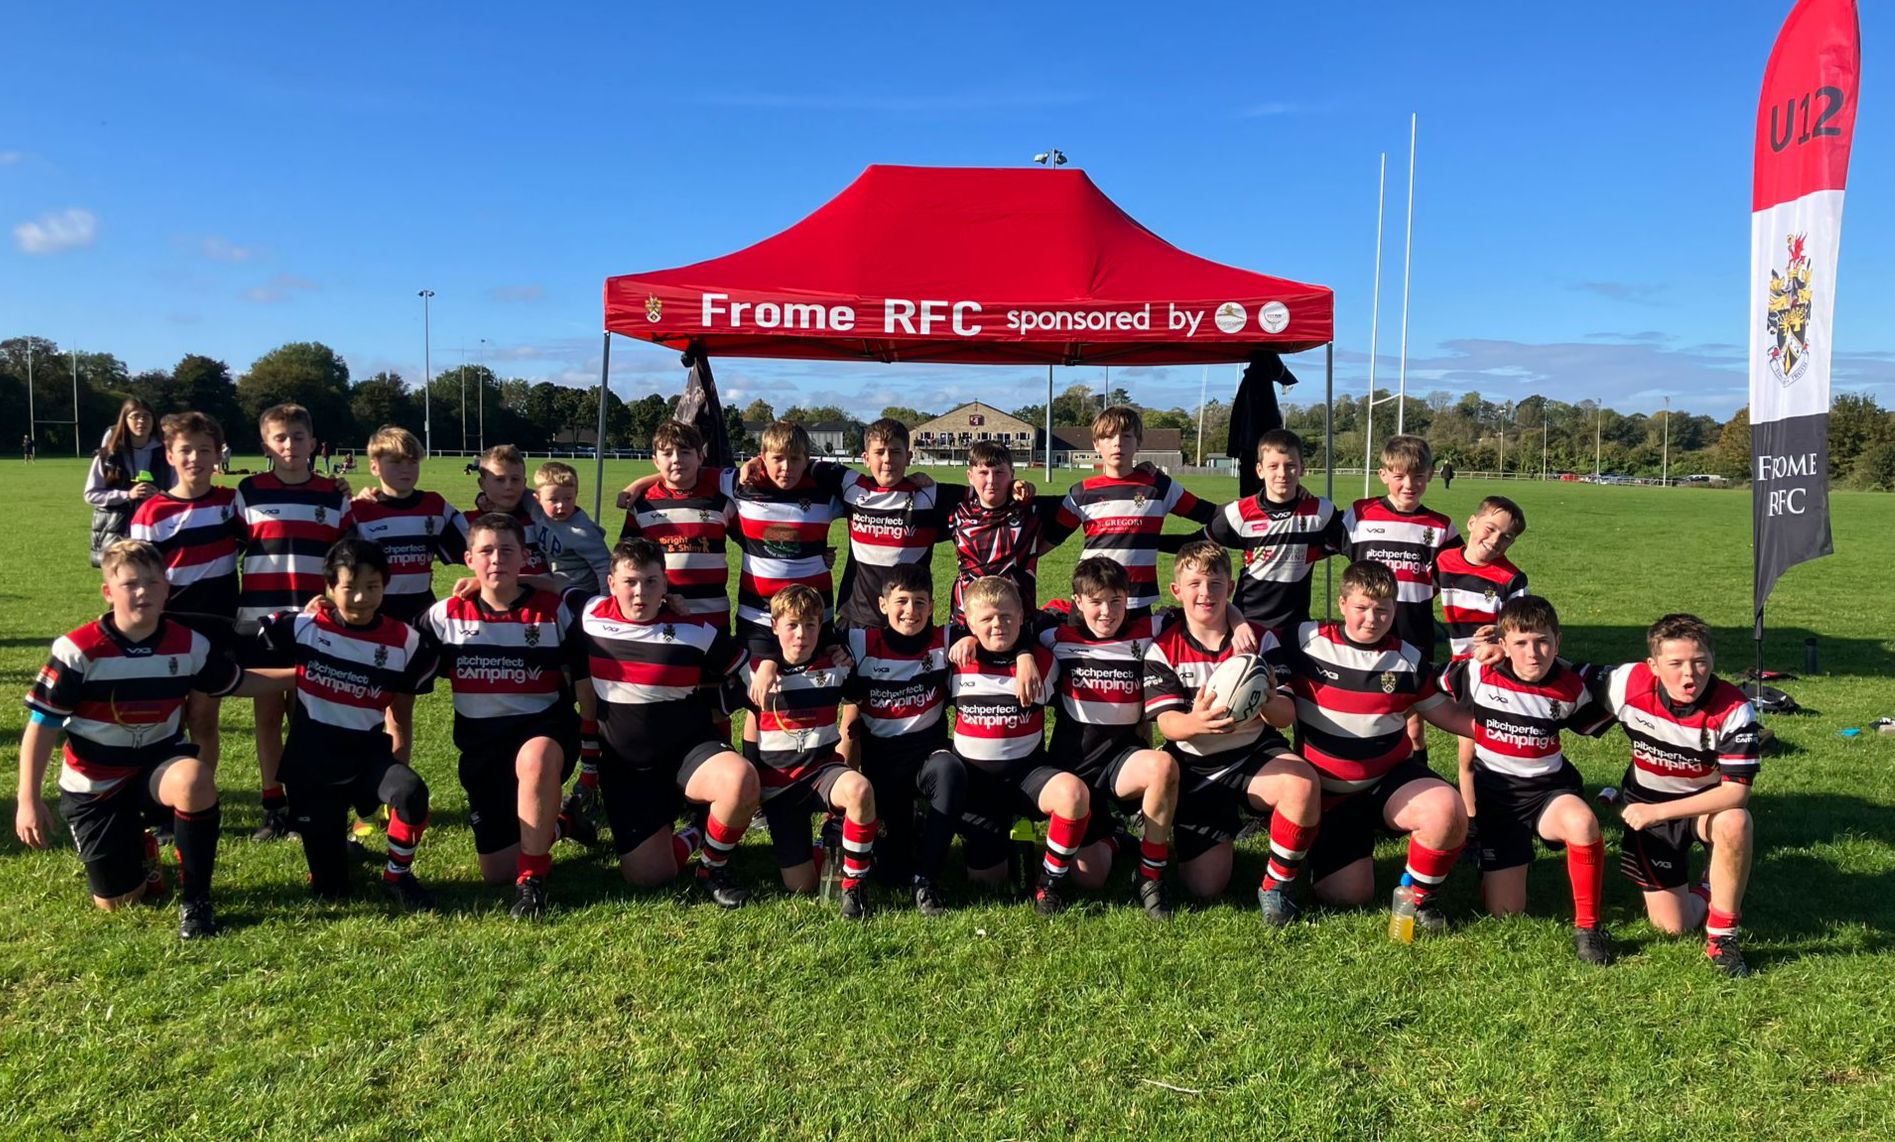 The Frome RFC U12s welcome Hornets RFC to The Lane